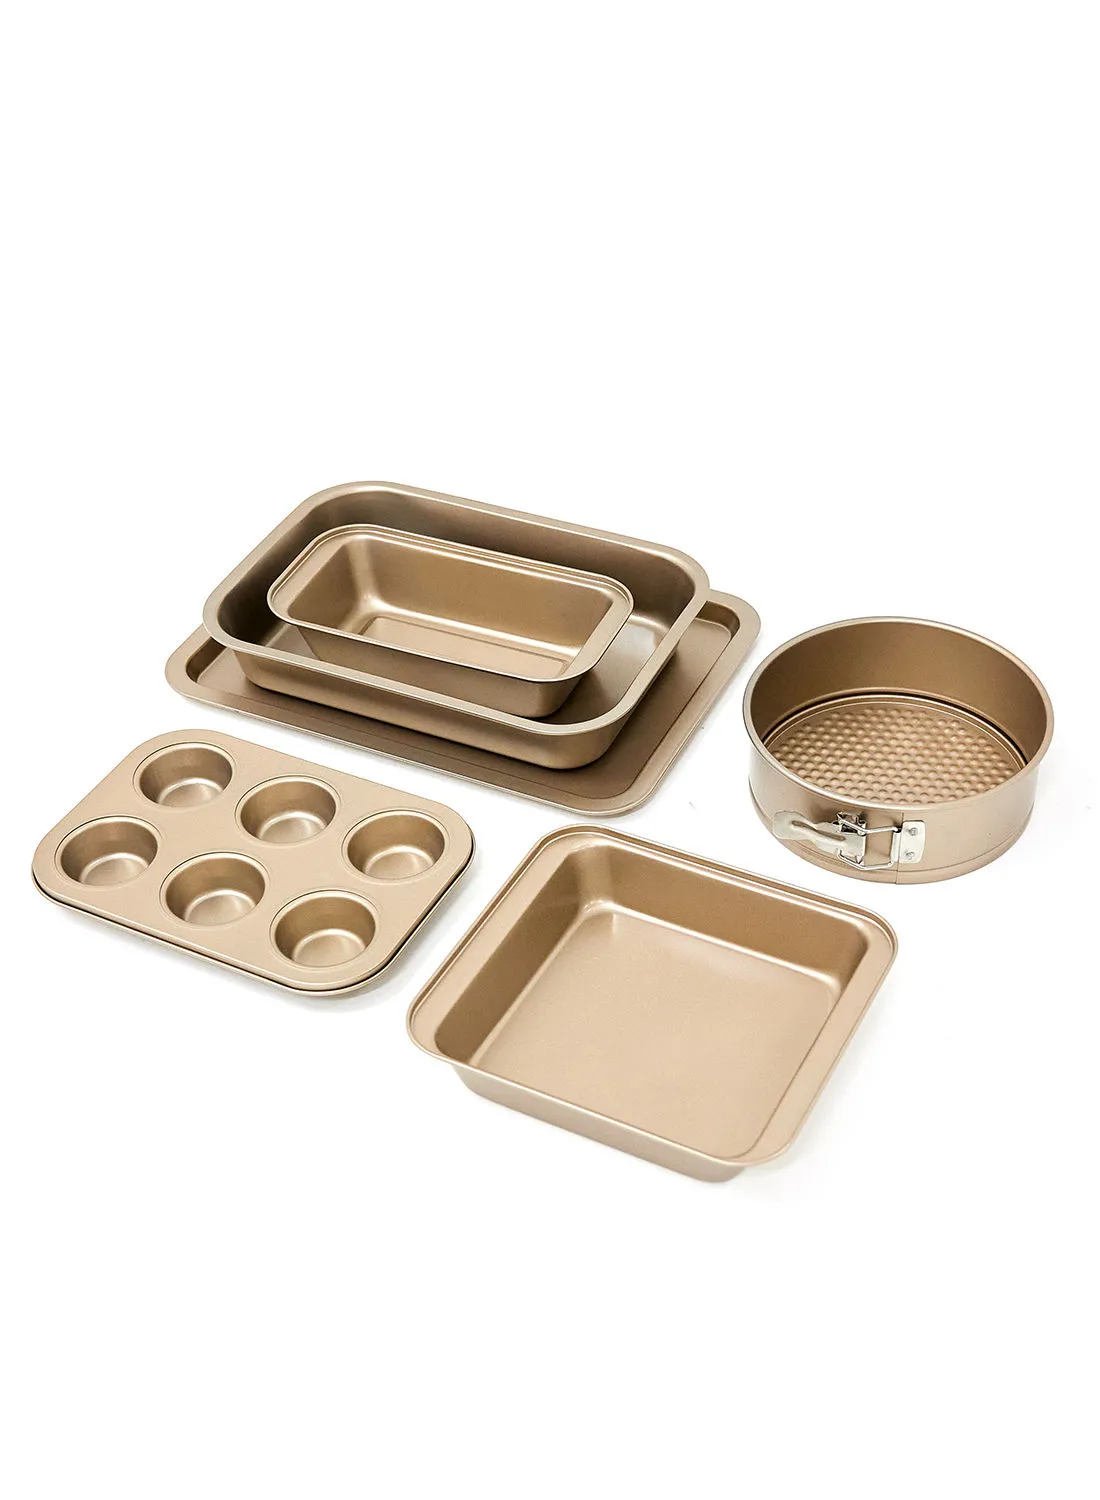 Noon East 6 Piece Oven Pan Set - Made Of Carbon Steel - Baking Pan - Oven Trays - Cake Tray - Oven Pan - Cake Mold - Rose Gold Rose Gold 6-Piece Set